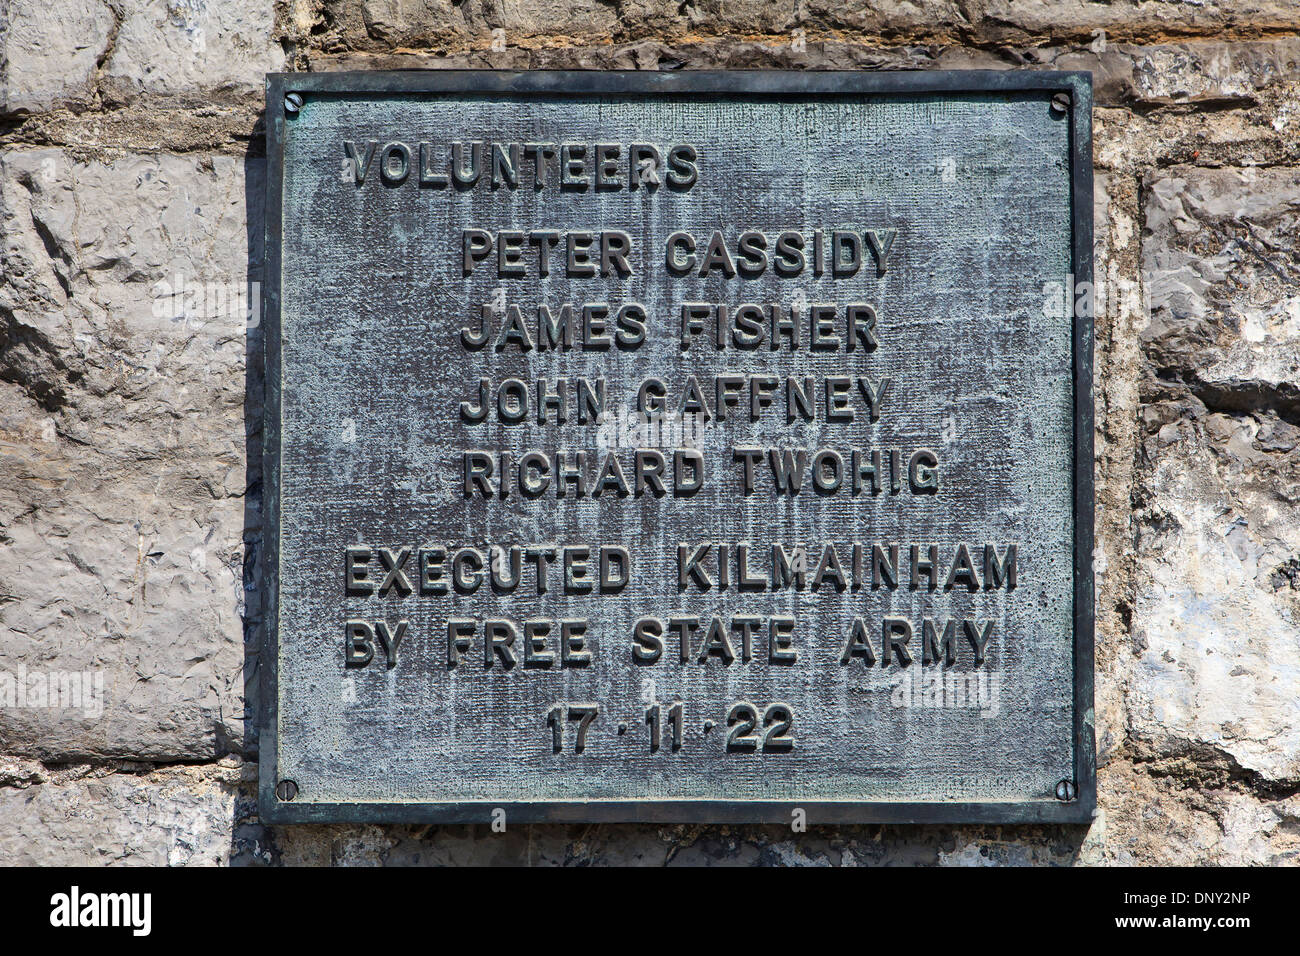 Plaque marking the volunteers that were executed by the Free State Army at Kilmainham Goal in Dublin, Ireland Stock Photo